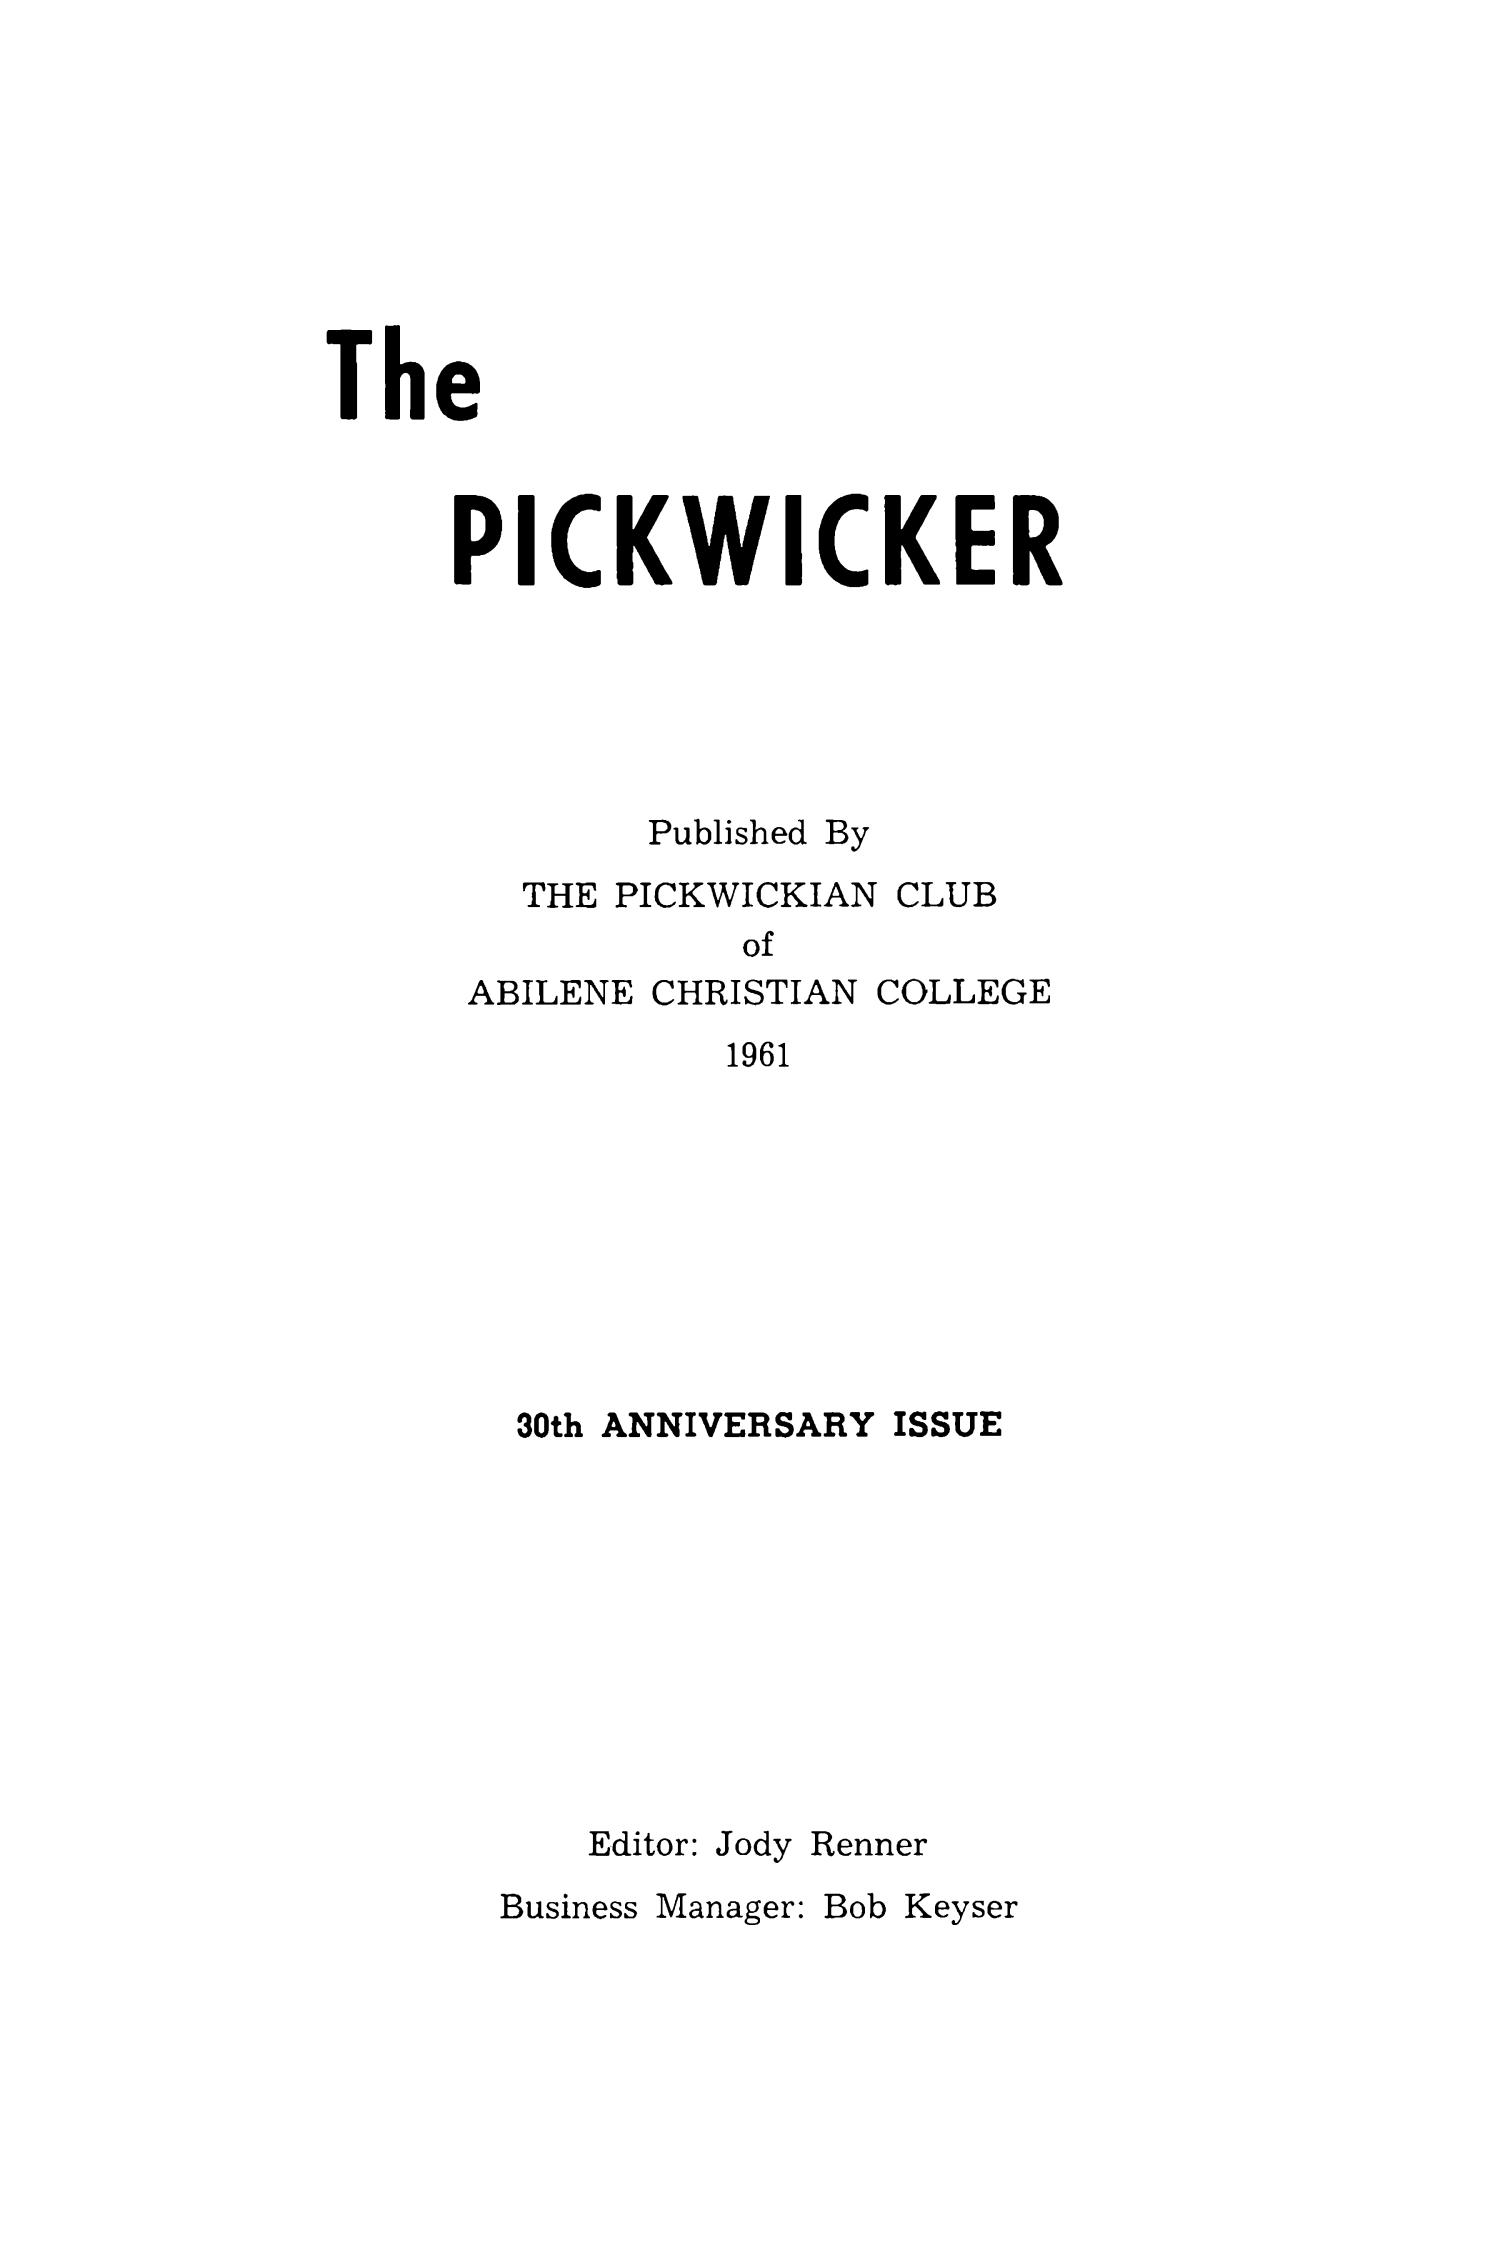 The Pickwicker, 1961
                                                
                                                    Title Page
                                                